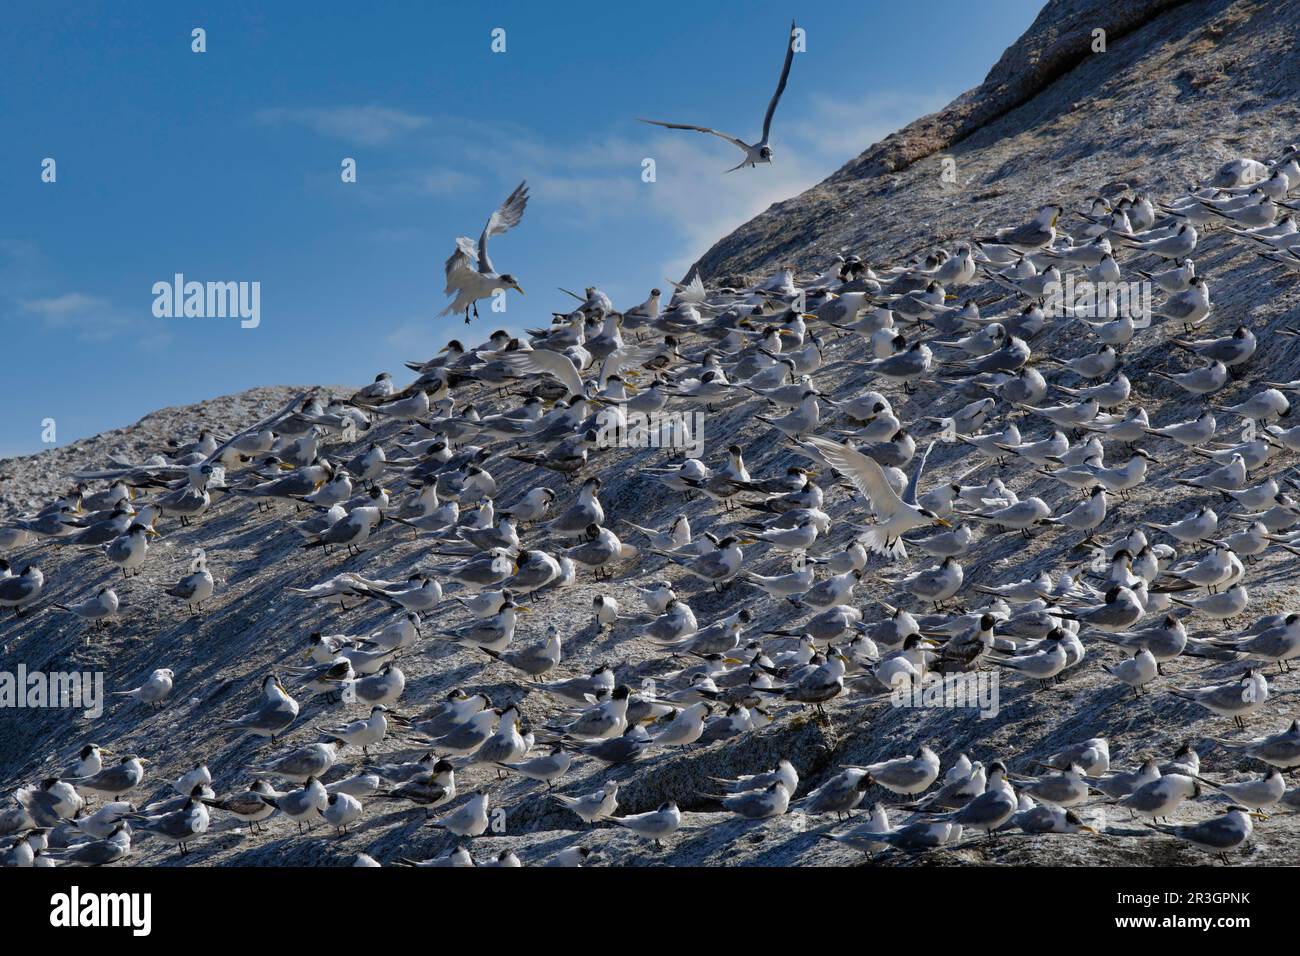 Great Crested-Terns (Thalasseus bergii), colony nesting at Boulder's beach, Cape Town, South Africa Stock Photo